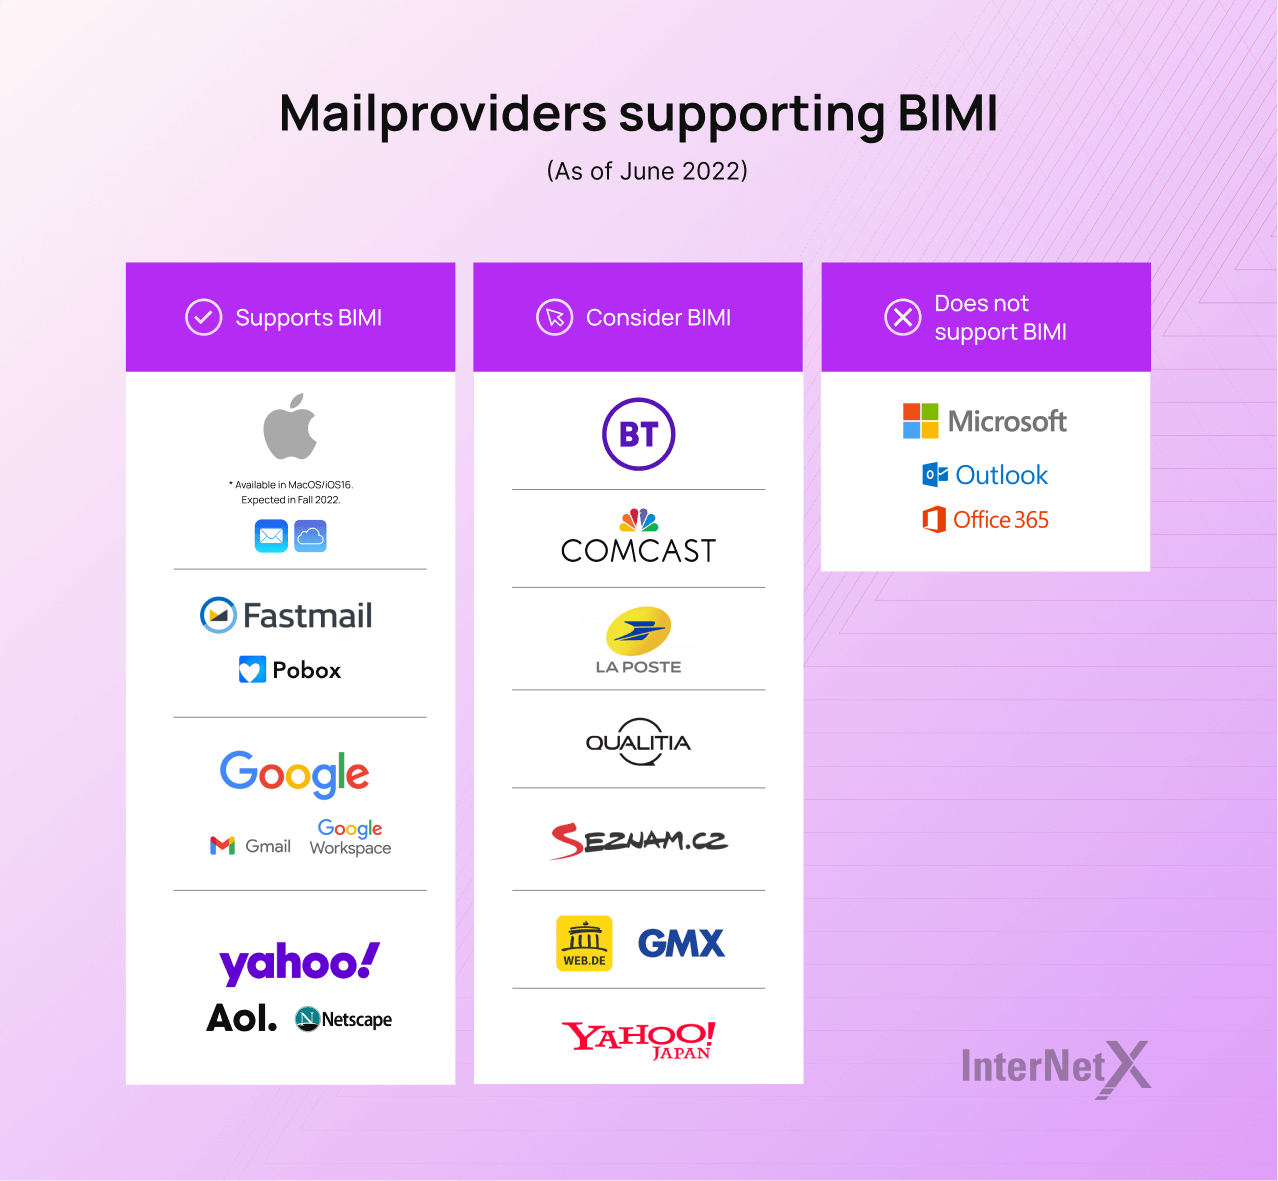 Several email providers, including Apple, Google, Yahoo!, and AOL, currently support BIMI for enhanced email security and authentication. However, Microsoft, Outlook, and Office 365 have not yet implemented BIMI support.